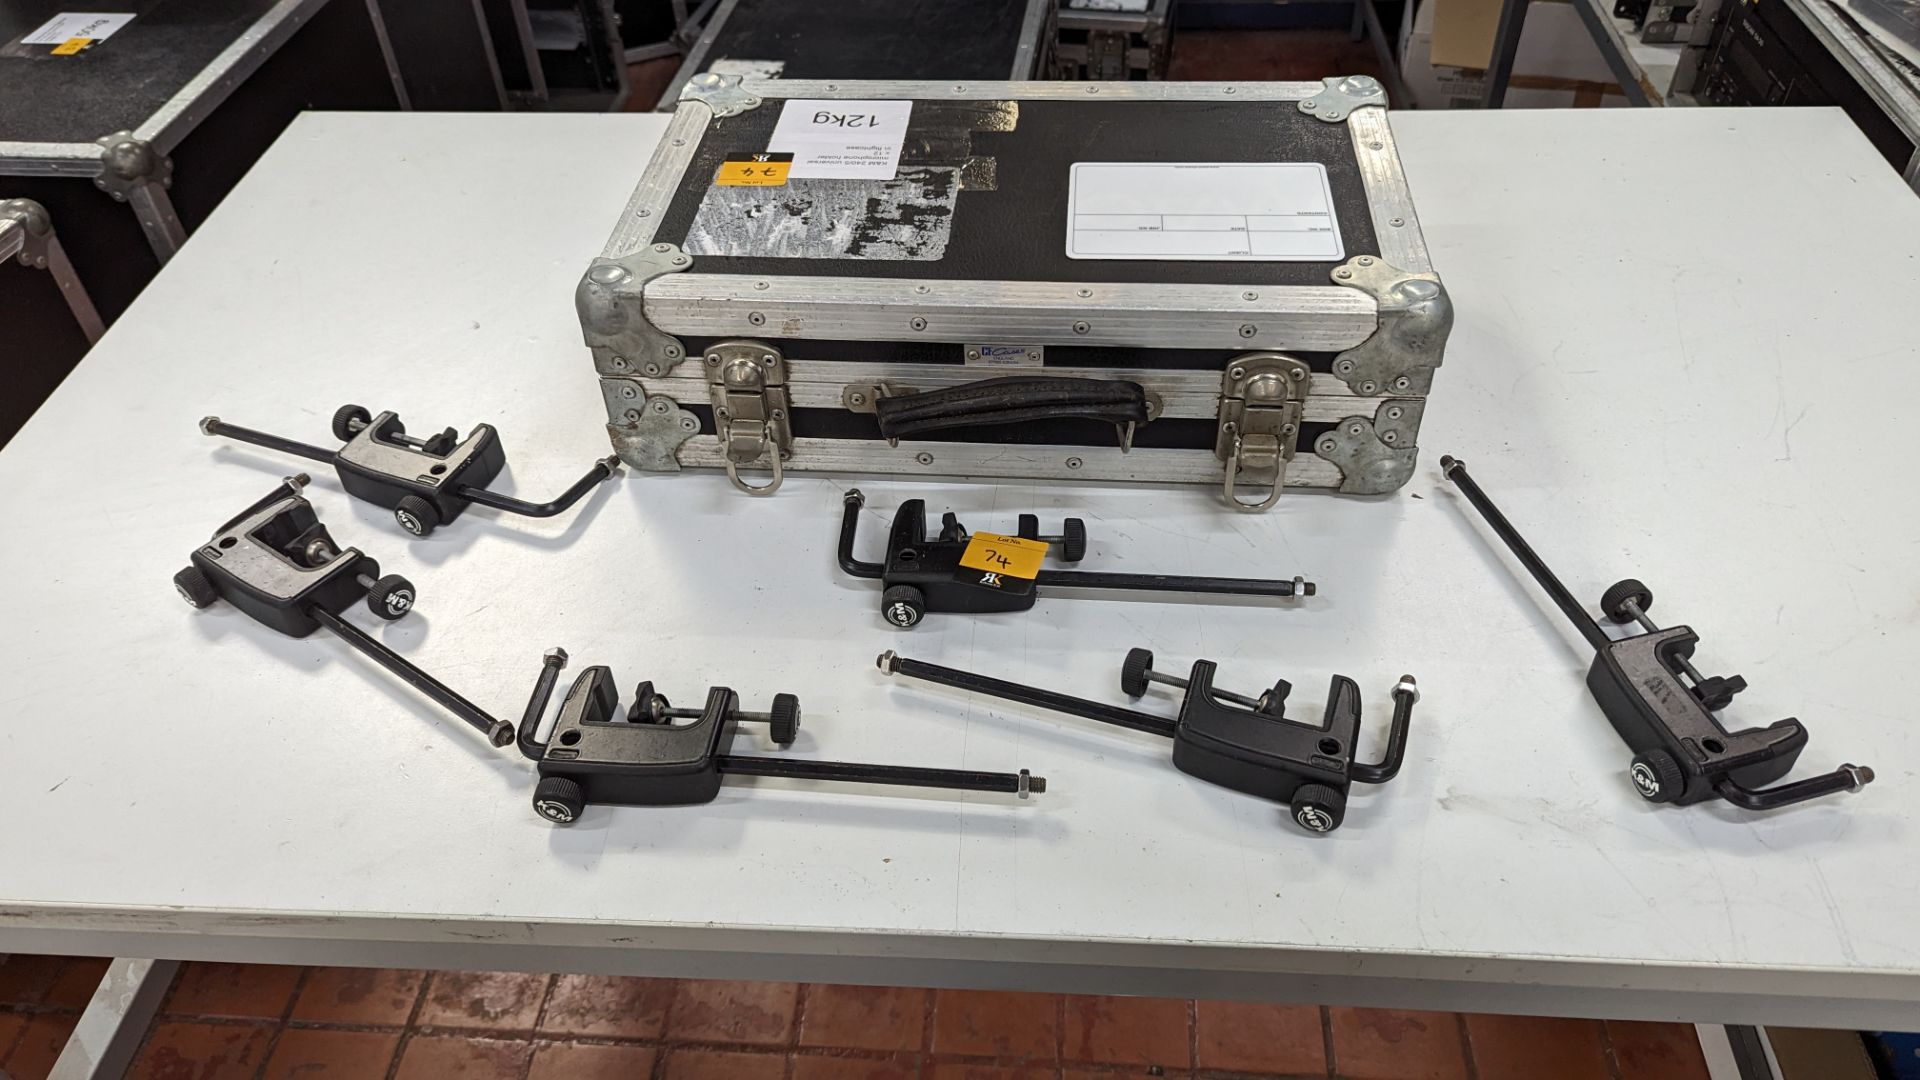 12 off K&M model 240/5 universal microphone holders. Including flight case. Total lot weight: 12kg - Image 10 of 10